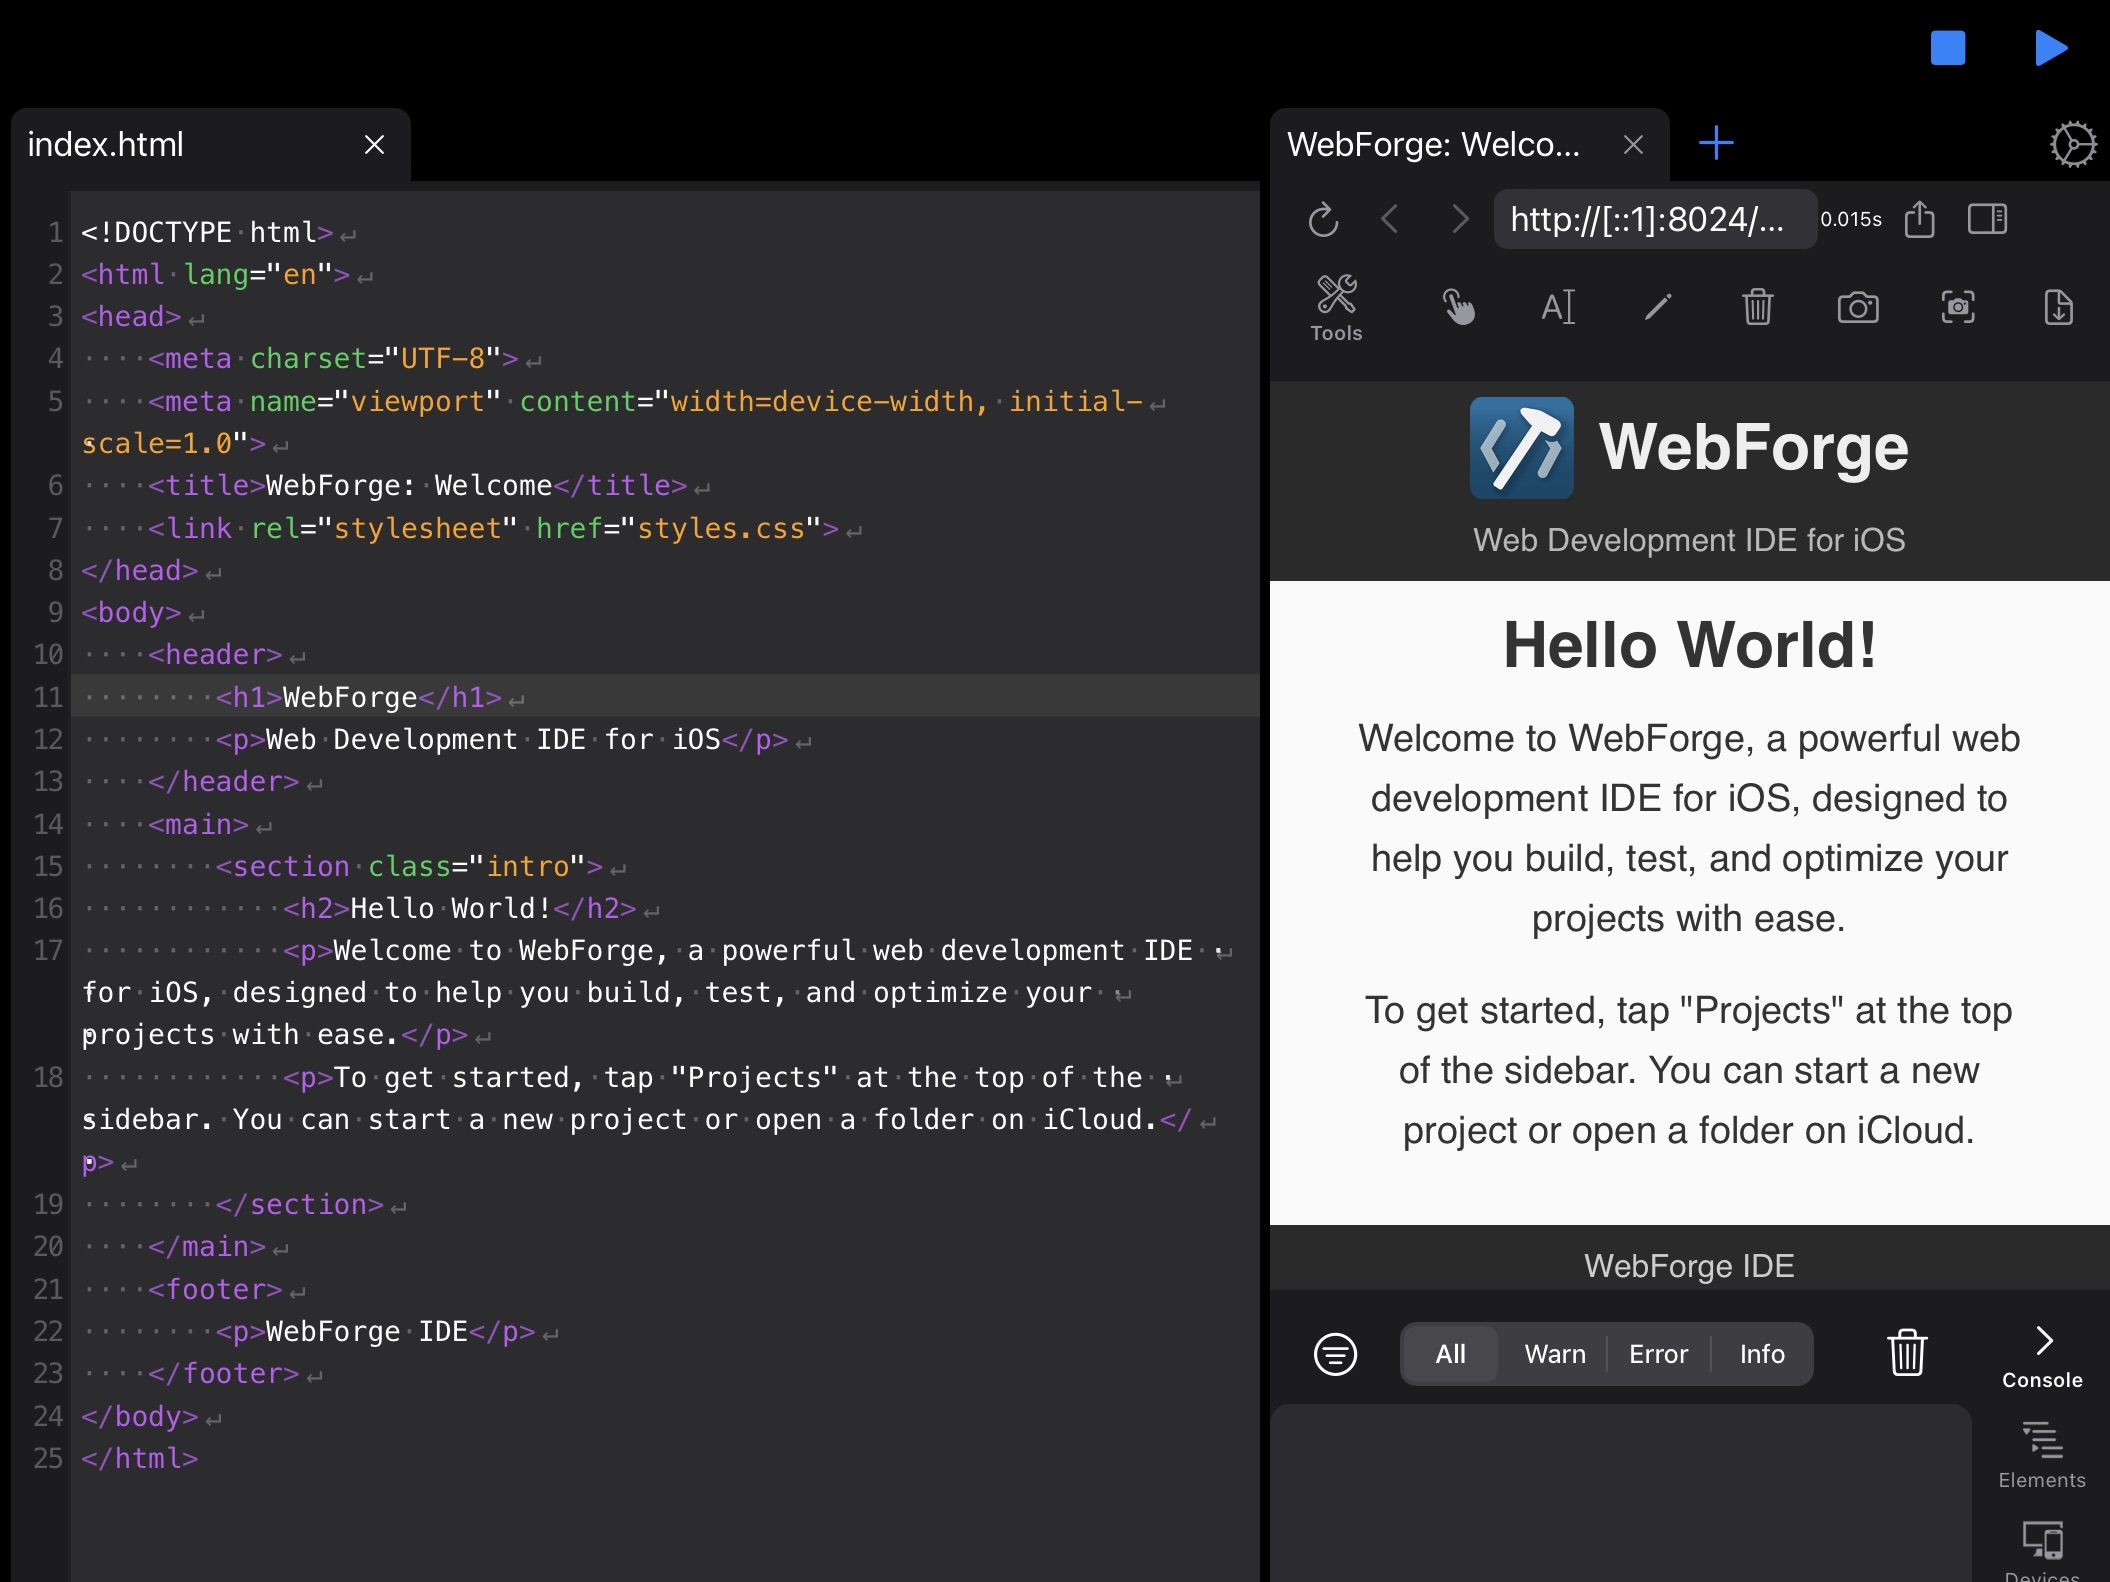 Screenshot of the WebForge editor with open browser